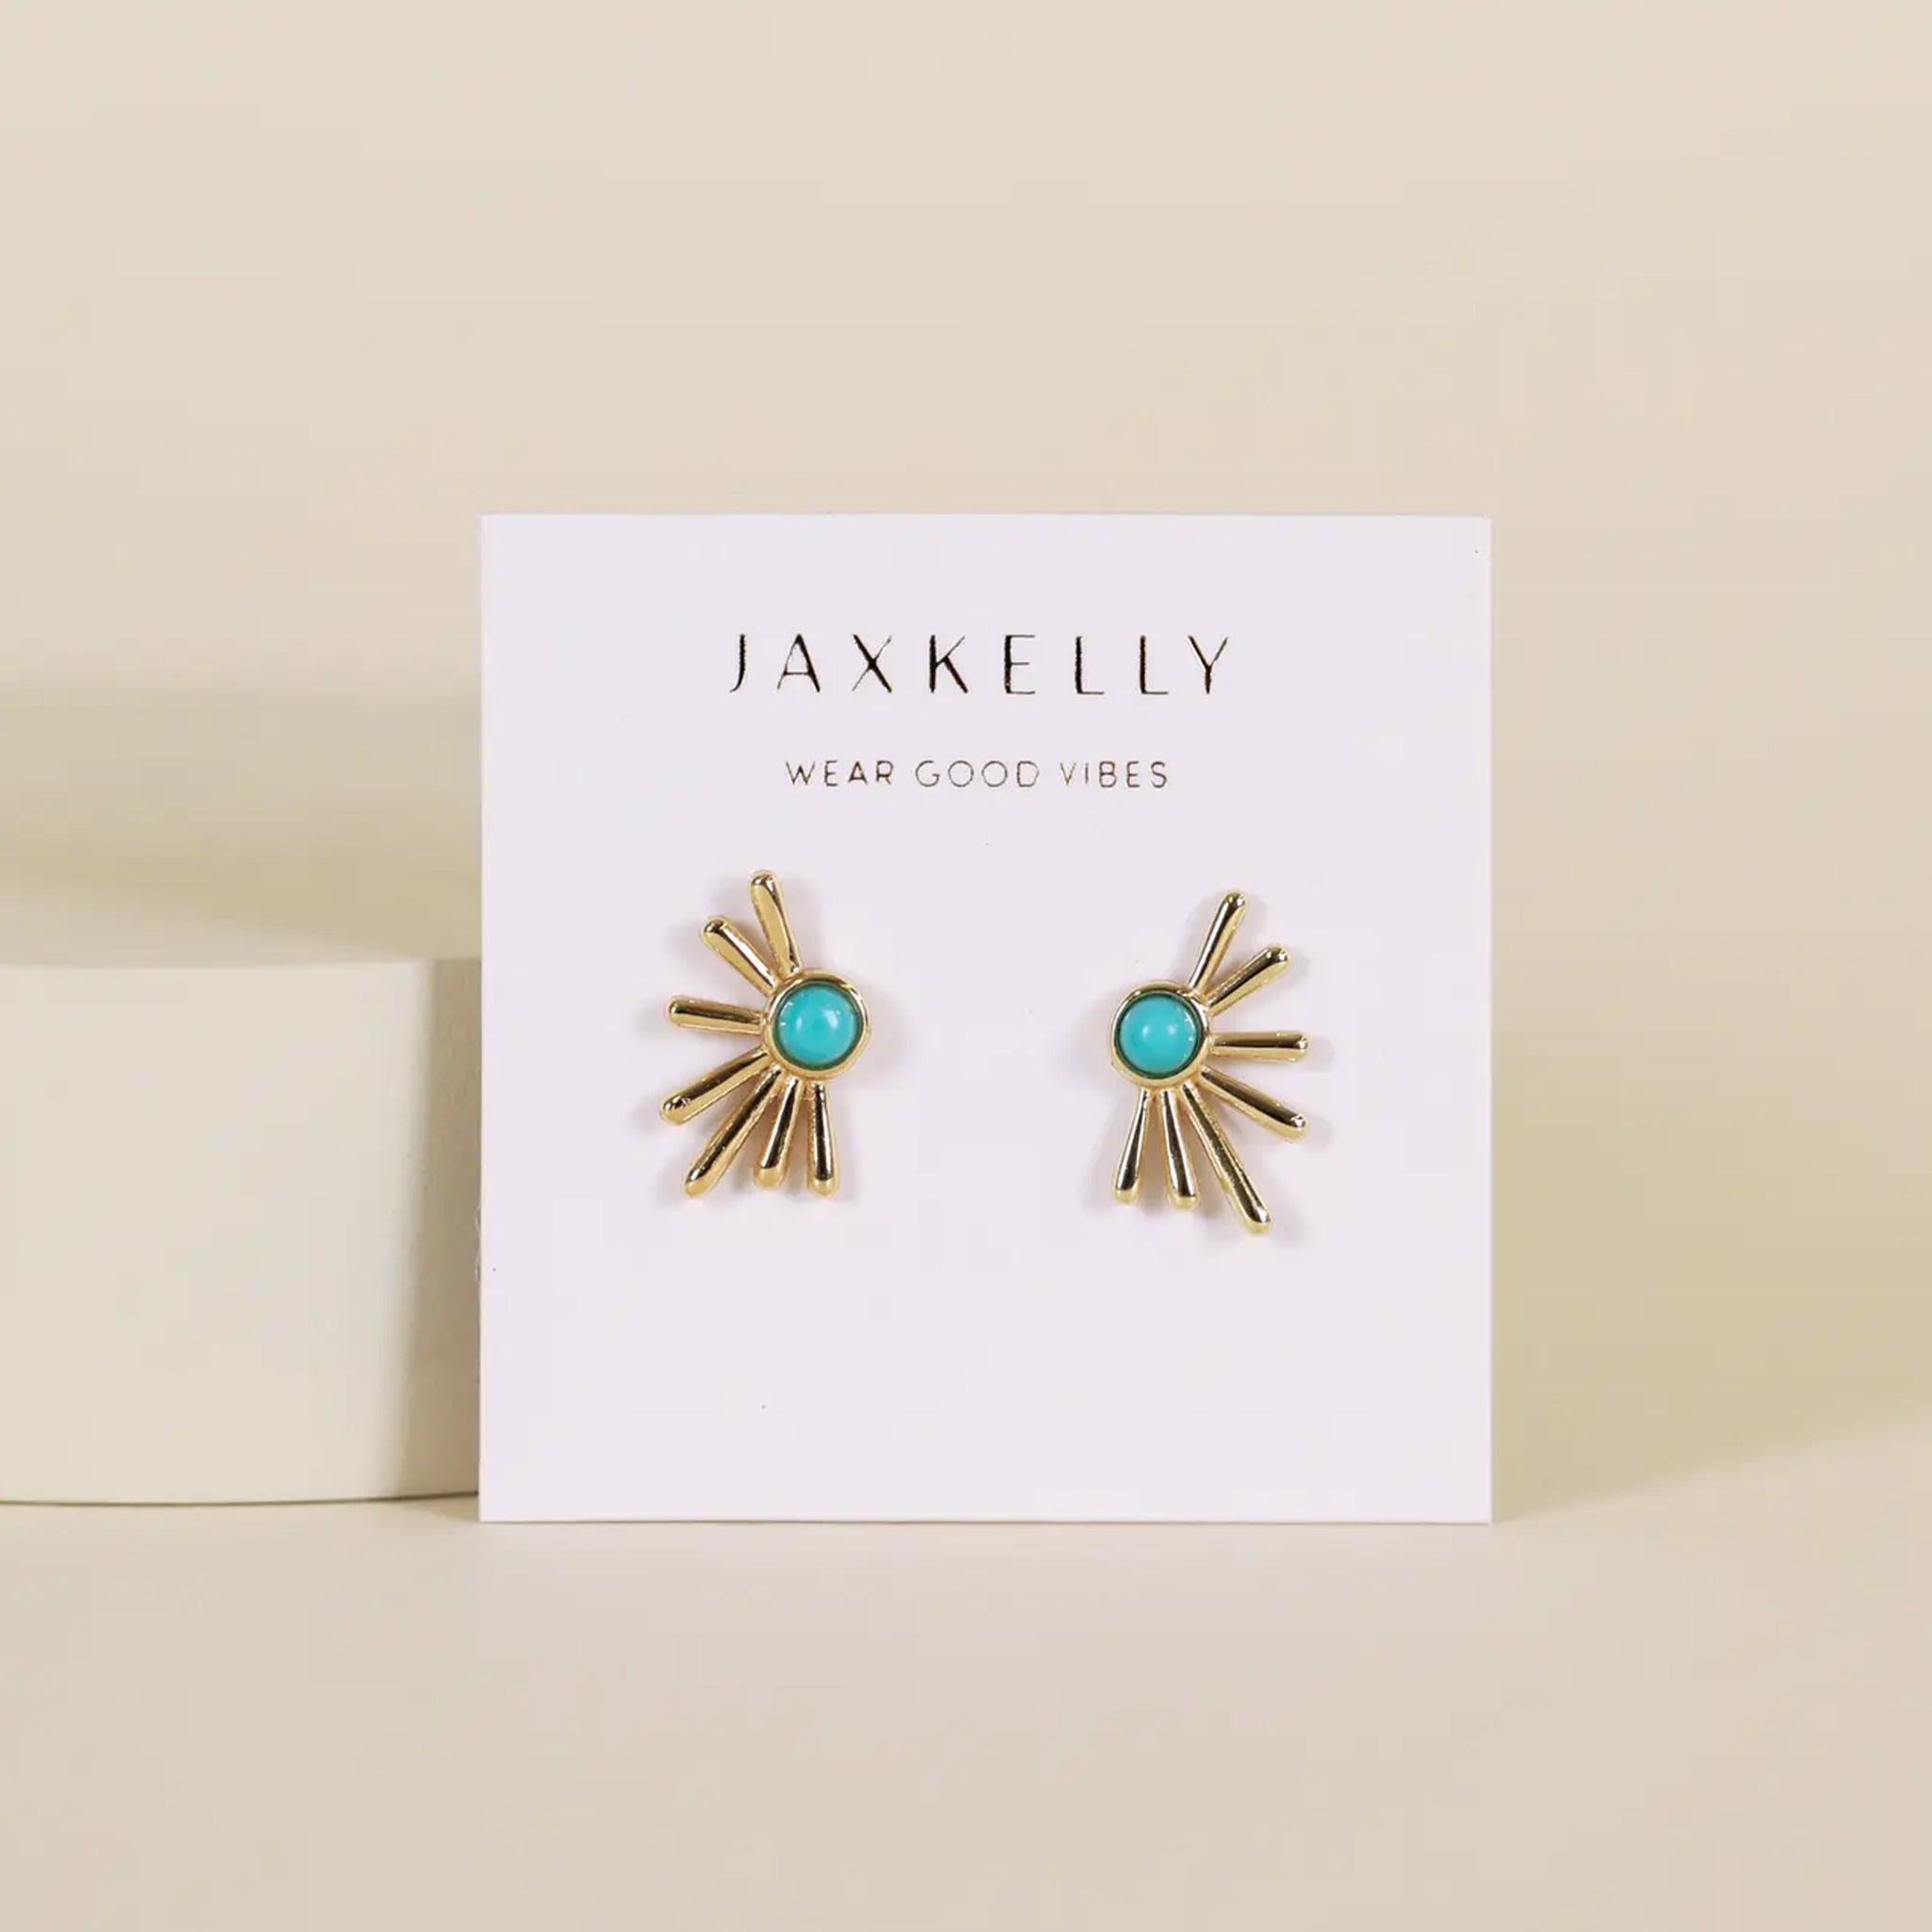 A pair of sunburst shape gold earrings with a turquoise stone in the center. 